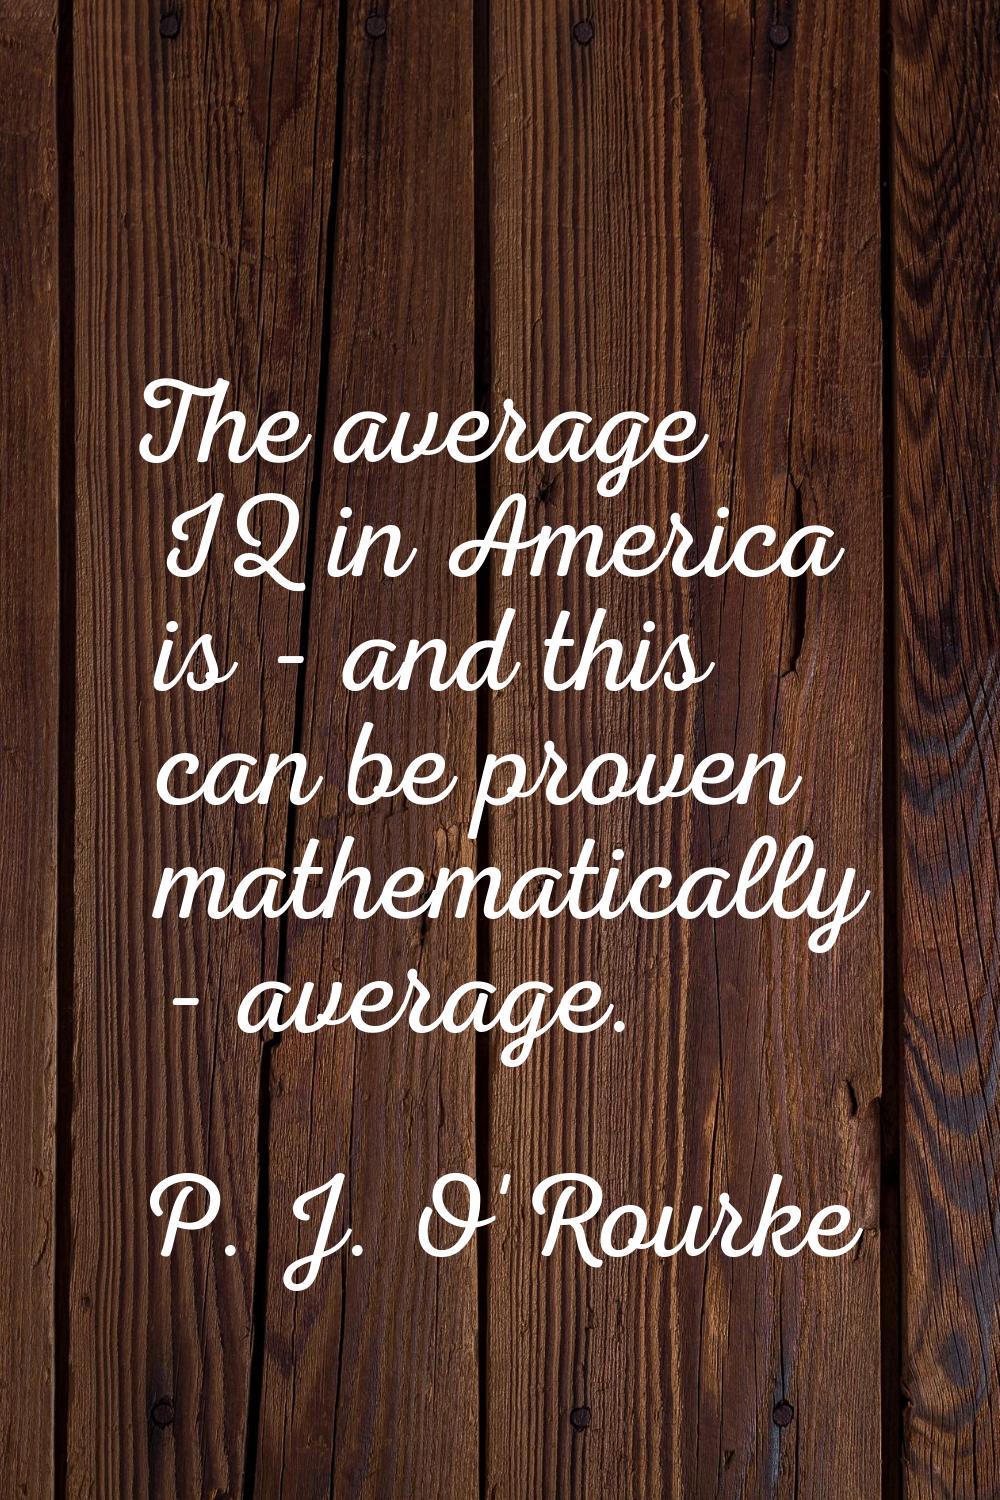 The average IQ in America is - and this can be proven mathematically - average.